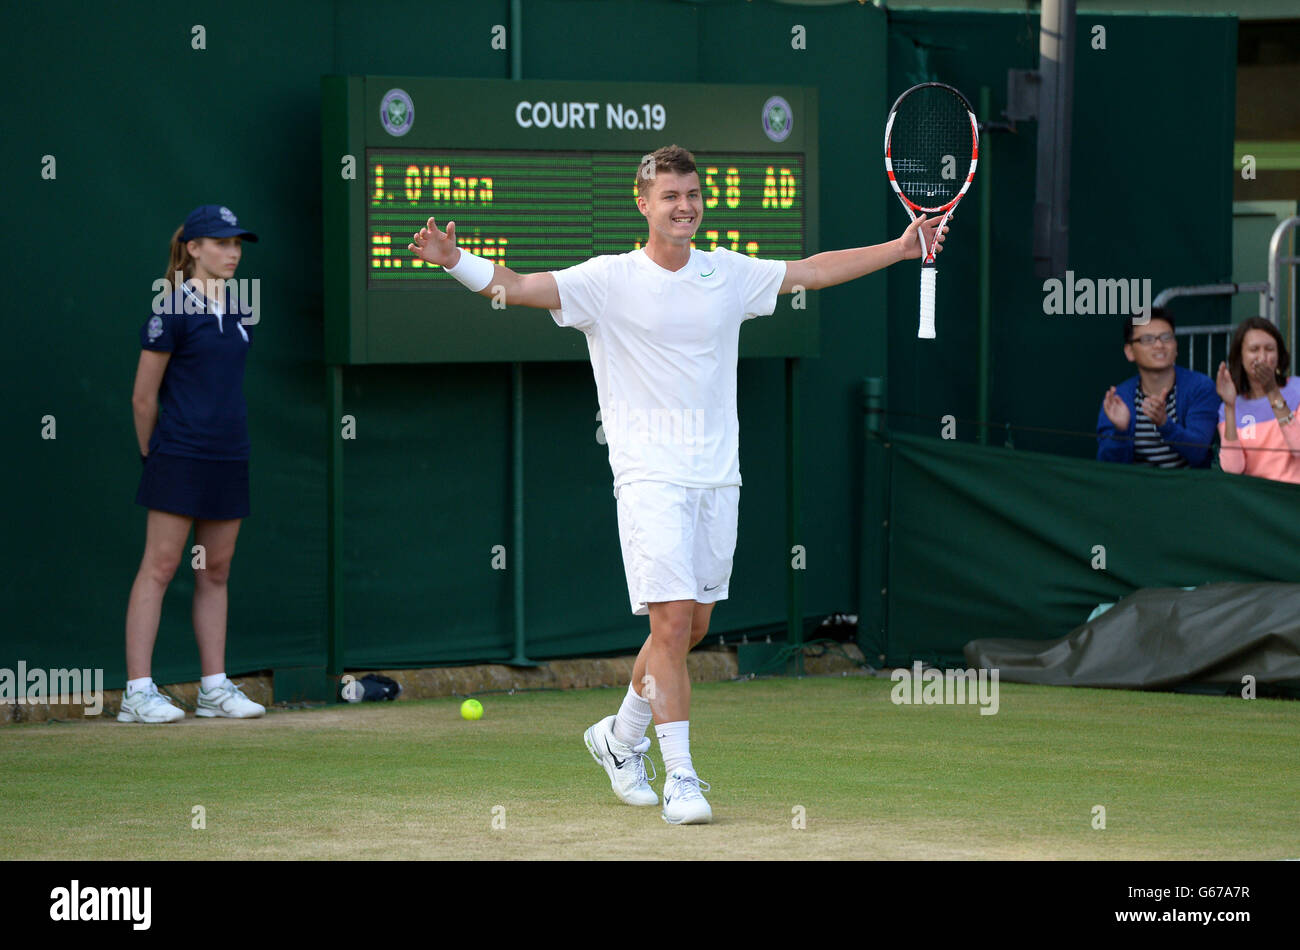 Great Britain's Jonny O'Mara celebrates defeating France's Maxime Janvier in his Boy's Singles match during day seven of the Wimbledon Championships at The All England Lawn Tennis and Croquet Club, Wimbledon. Stock Photo